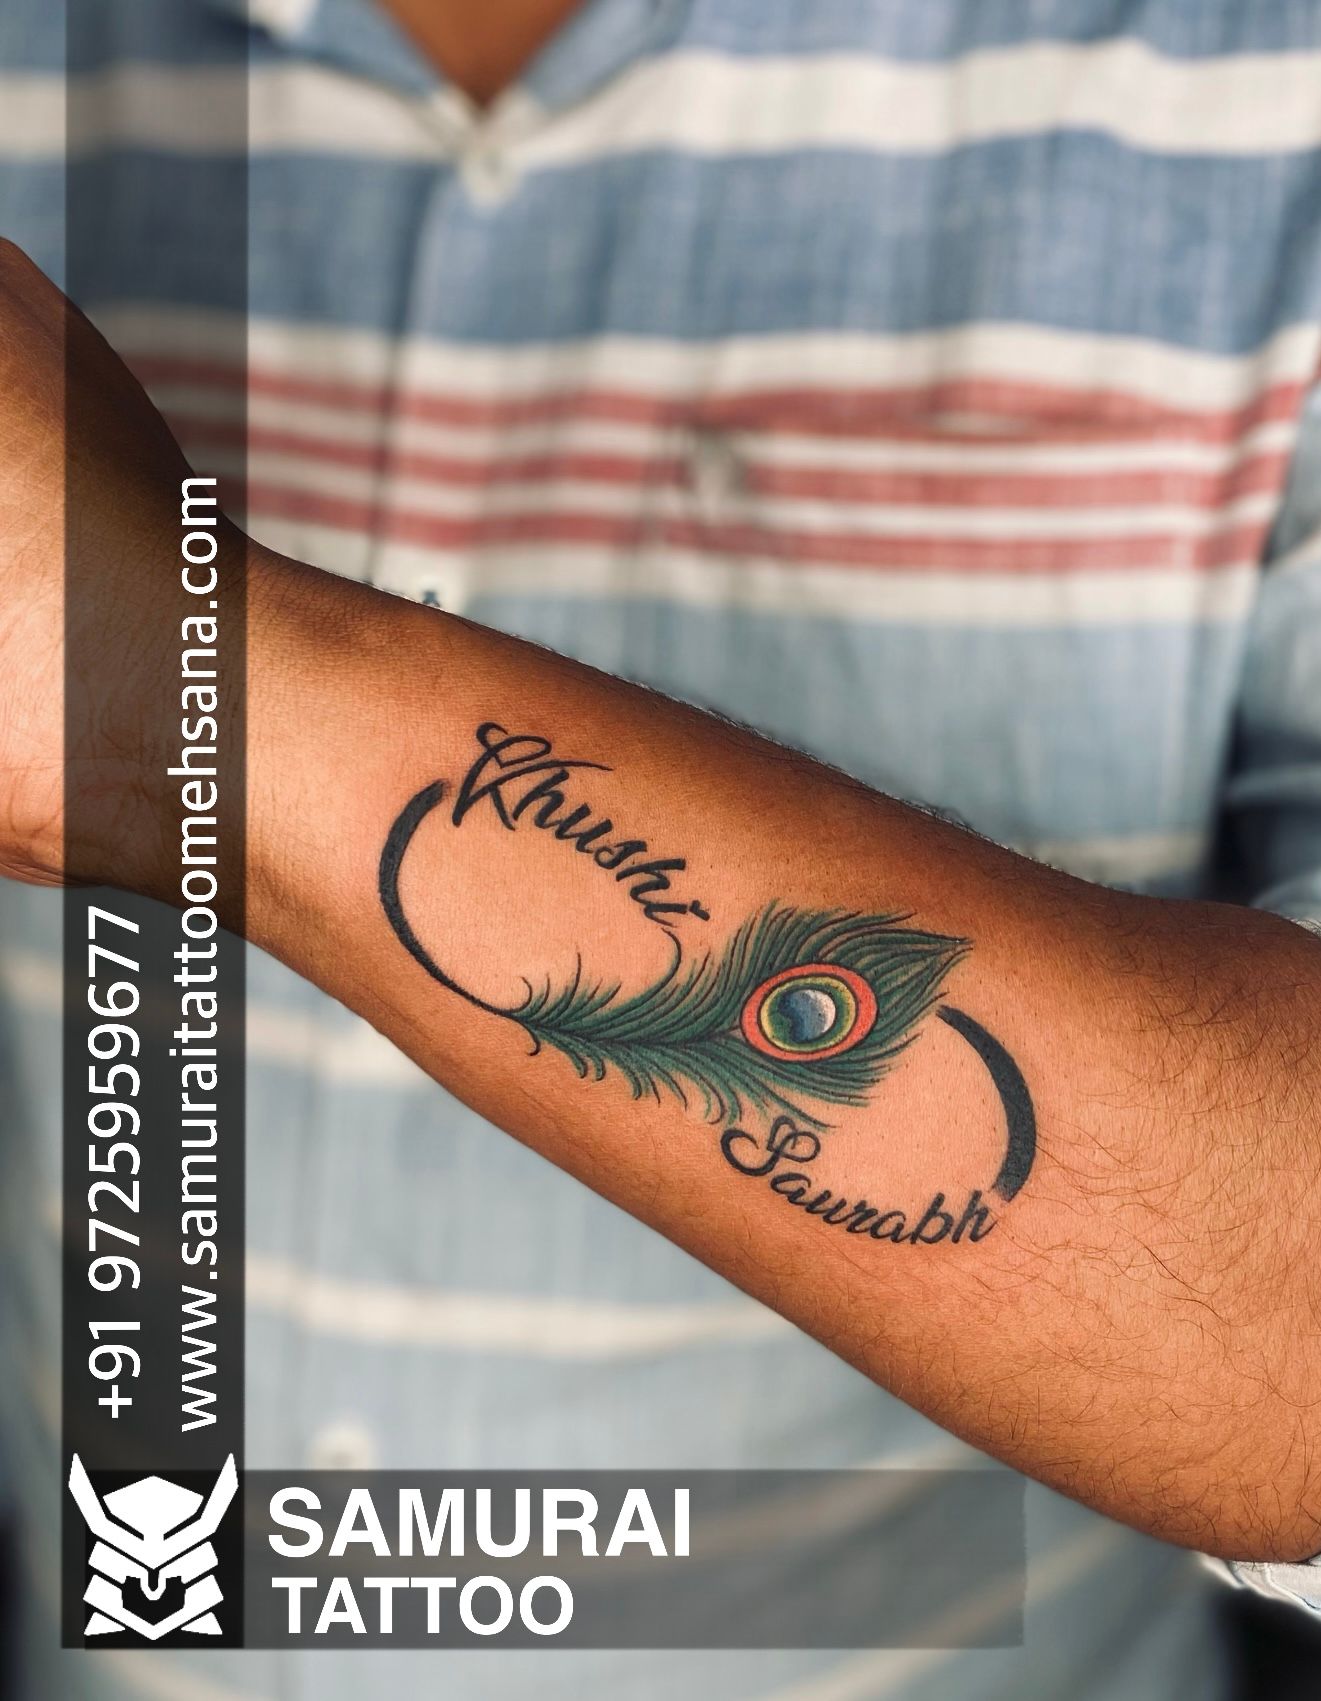 A name tattoo with Crown on forearm  181 Tattooz Studio  Facebook